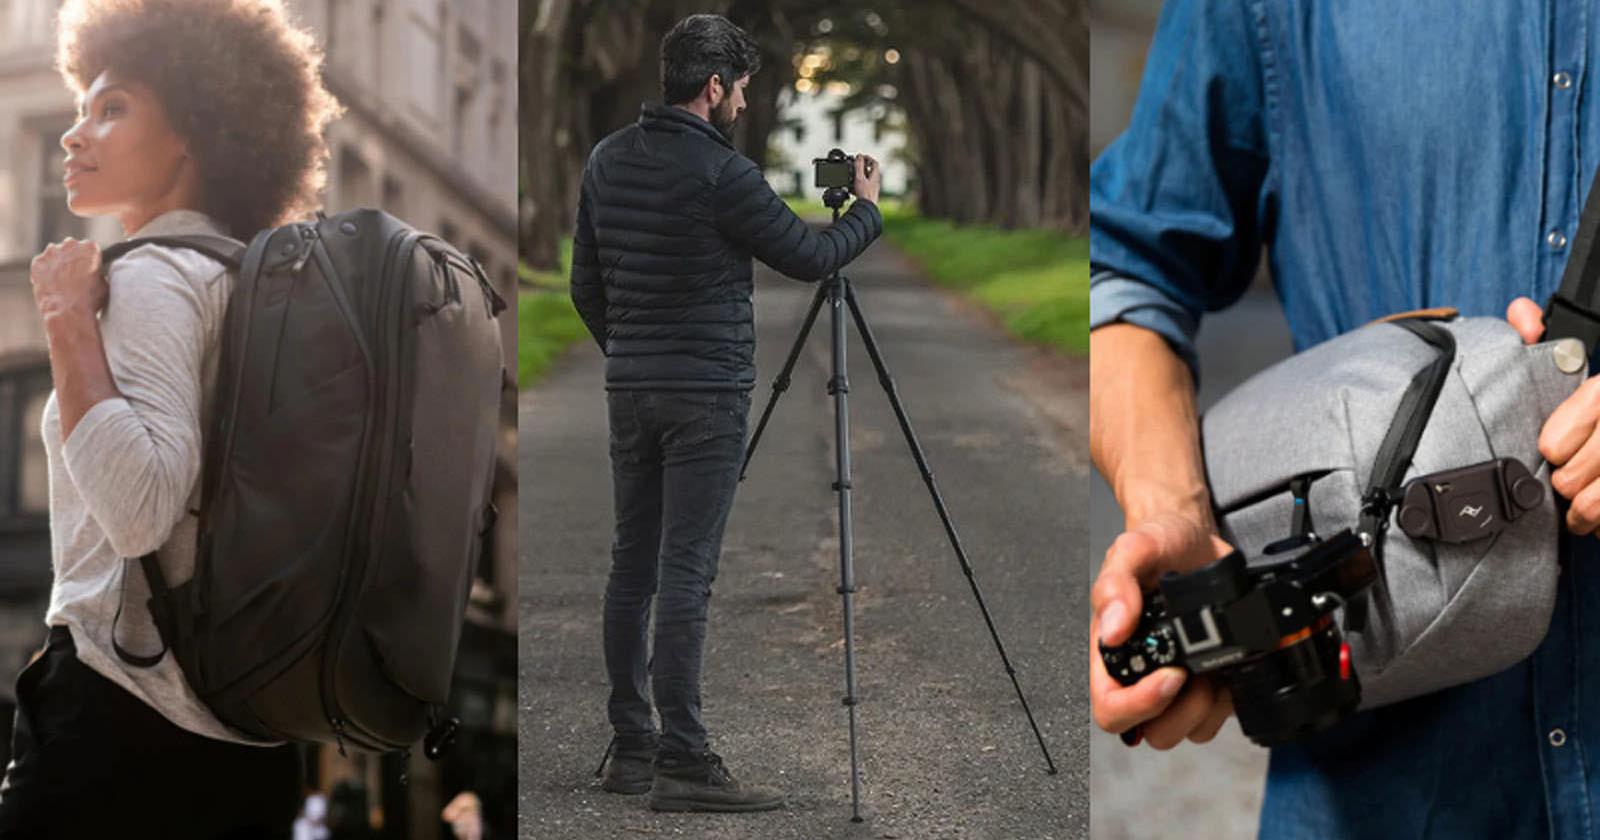 Deal Alert: Save Big and Up to 30% Off Peak Design Bags and Camera Gear